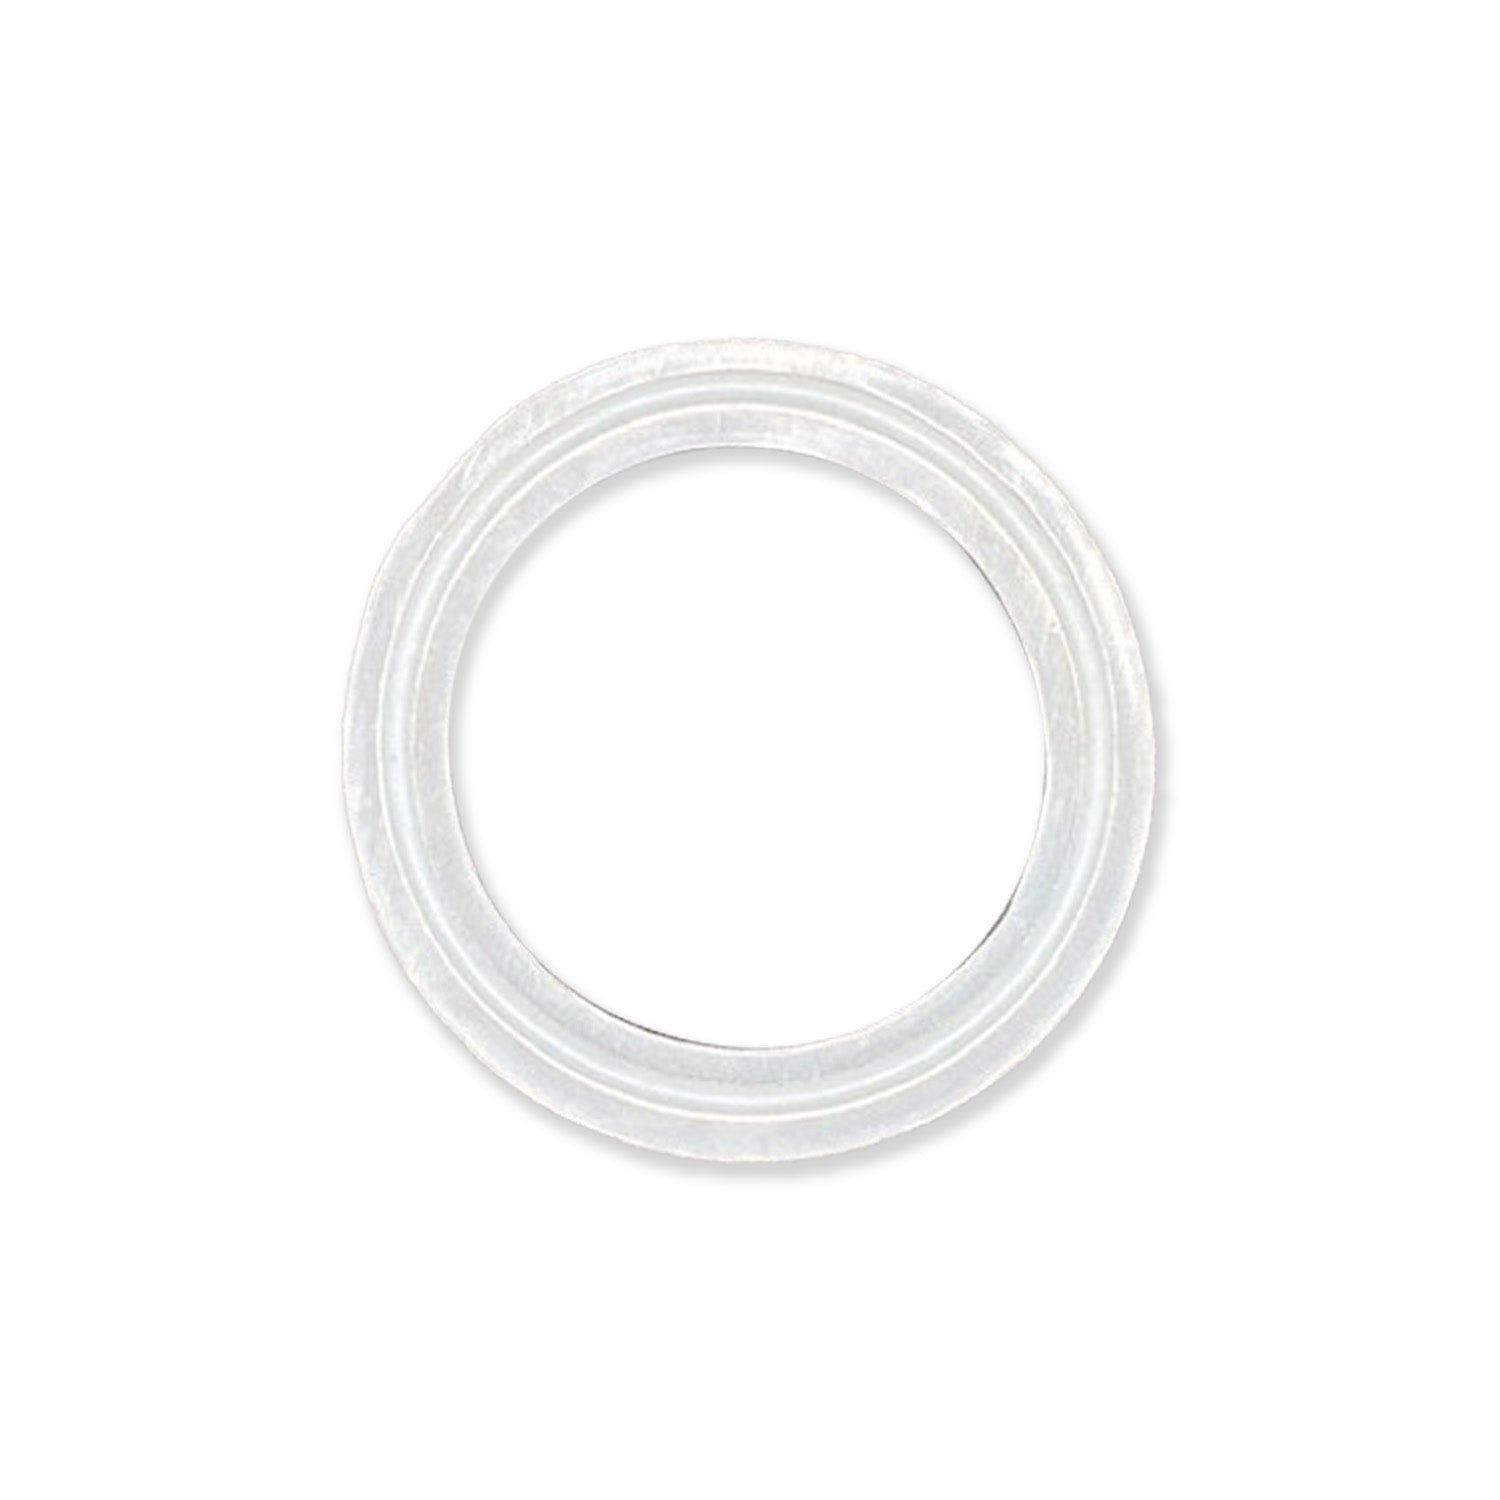 2.5" Tri-Clamp Gasket, Silicone, clear